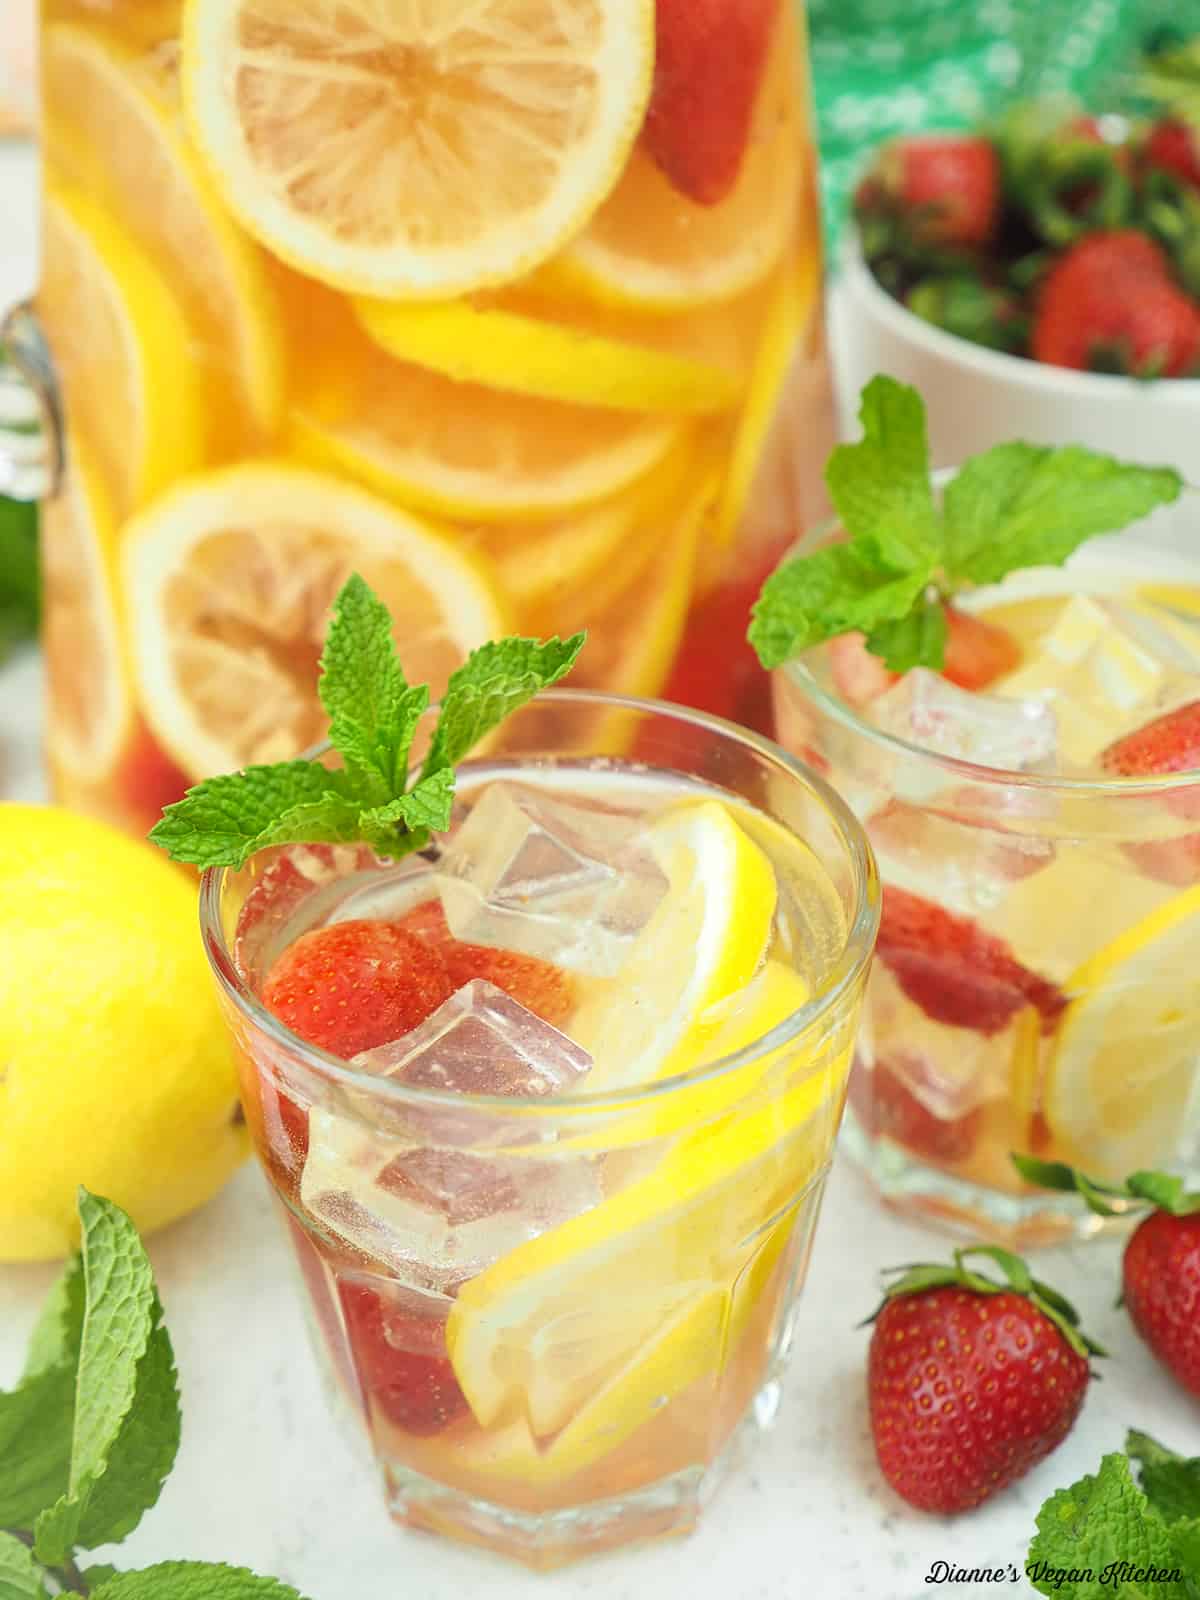 two glasses of white wine sangria with lemons and strawberries